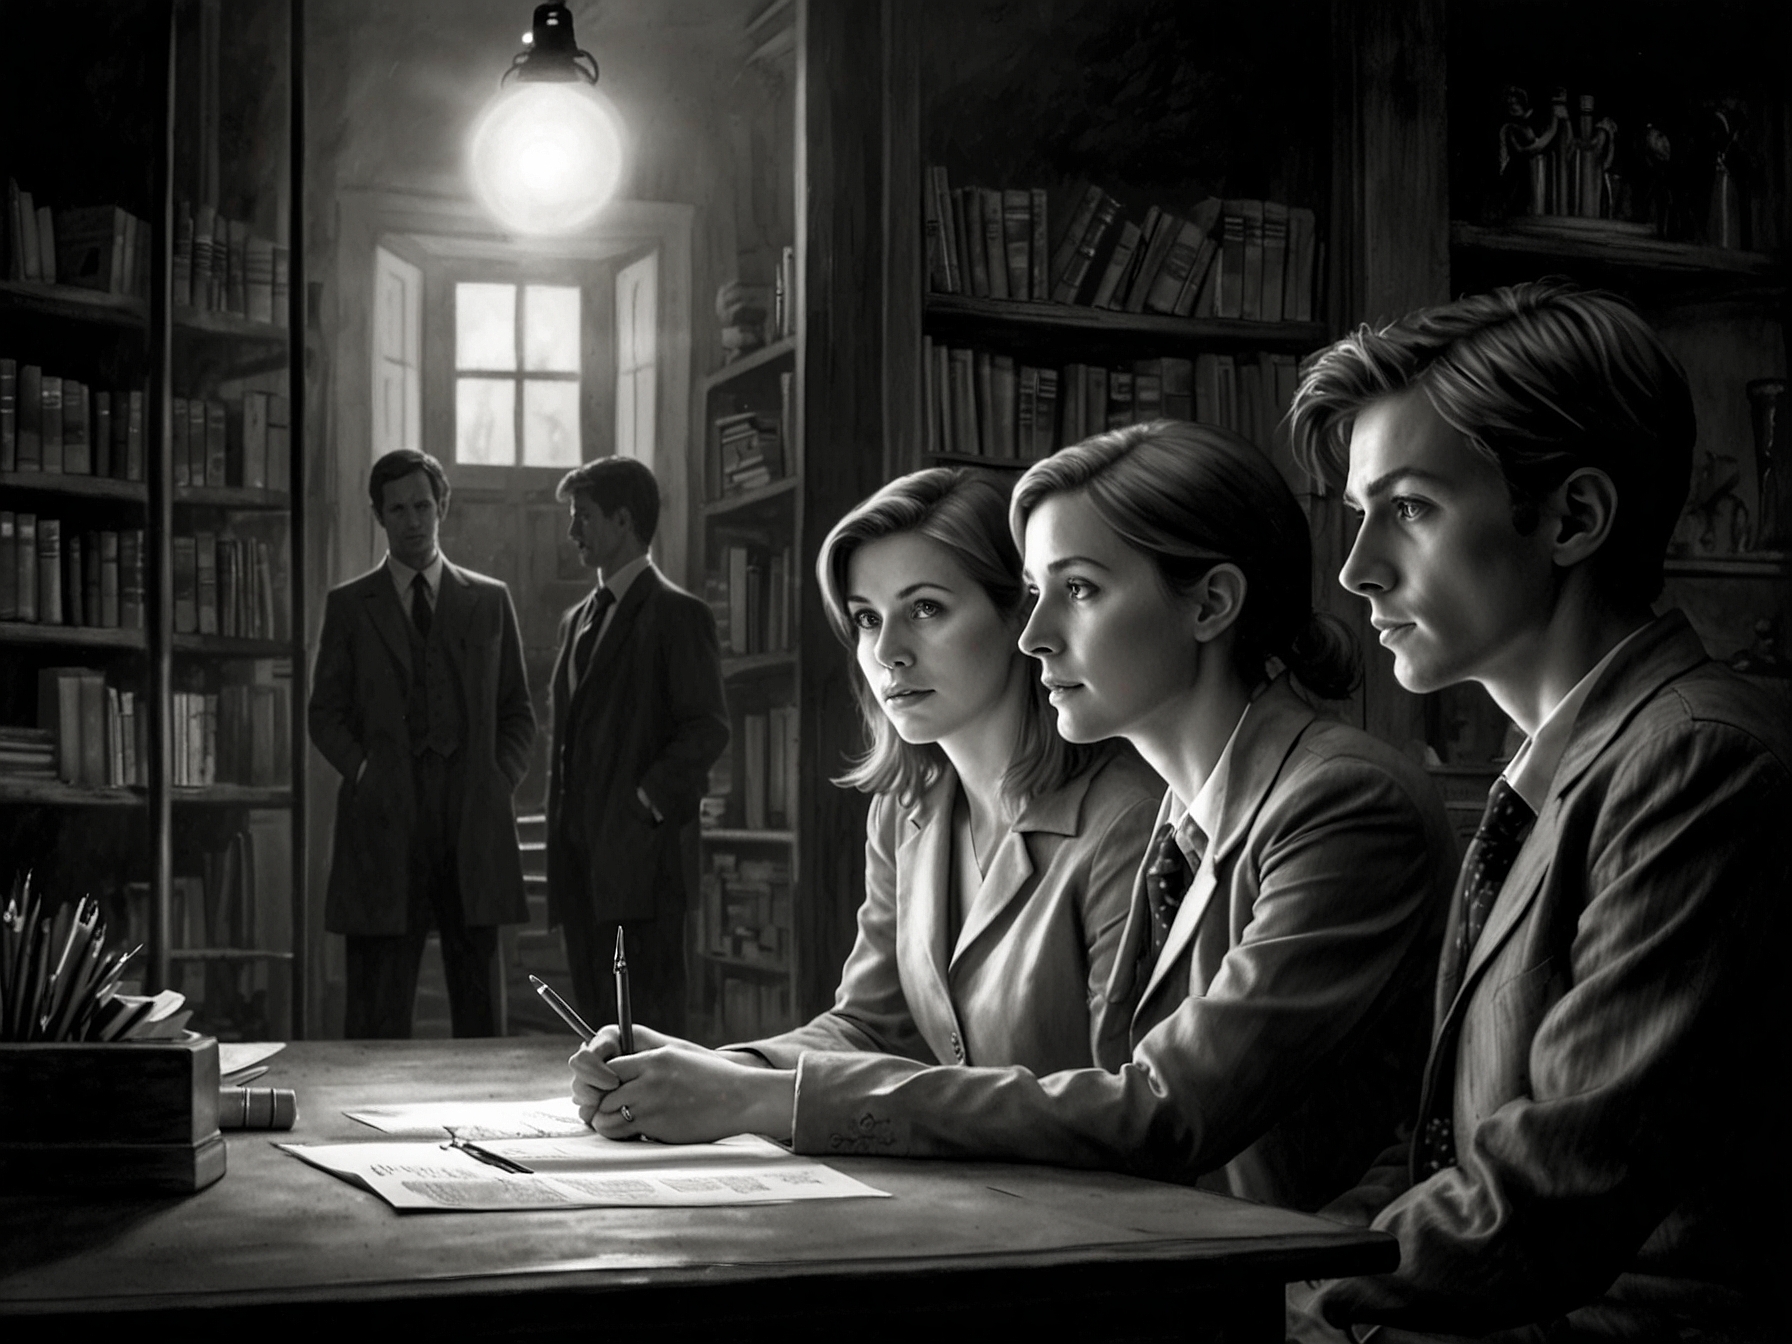 A scene showing the Doctor and companions engaged in a quiet, reflective moment, highlighting how small, intimate revelations often hold the key to understanding larger mysteries.